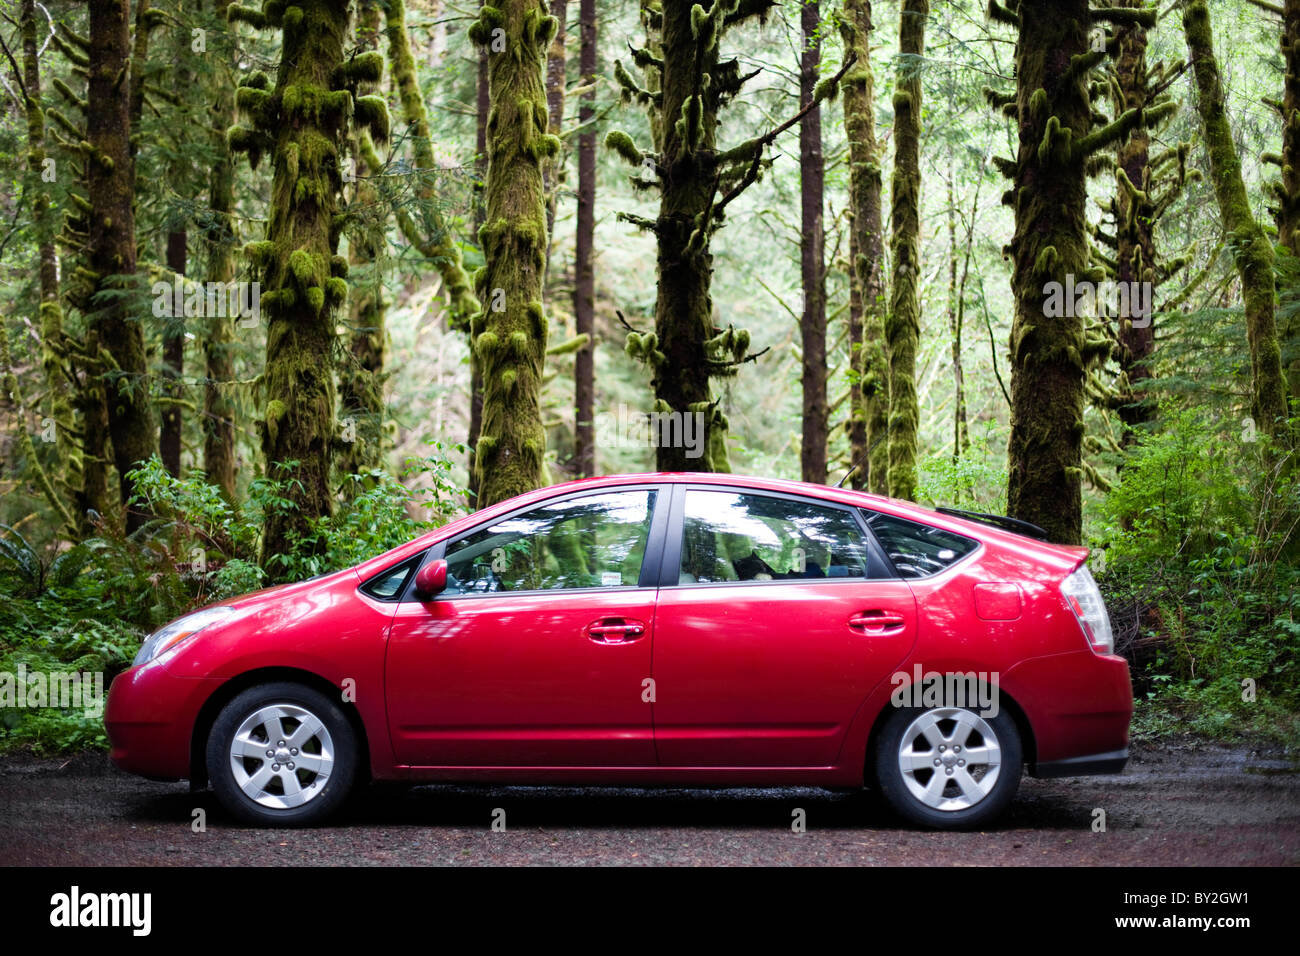 A red hybrid vehicle sits in a mossy, green forest. Stock Photo